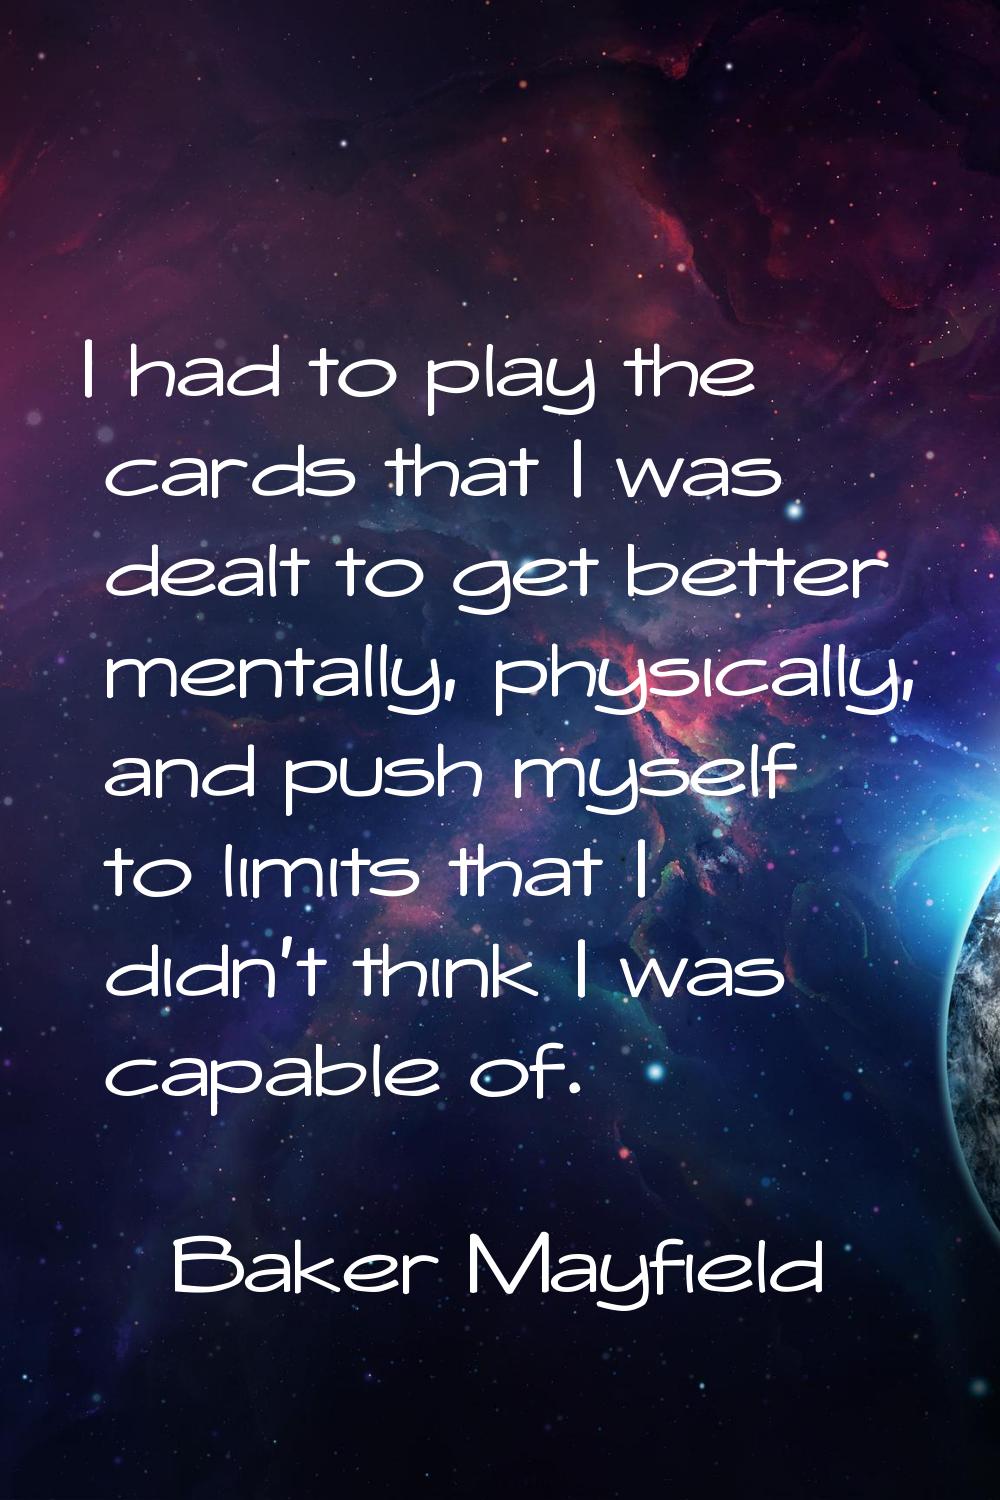 I had to play the cards that I was dealt to get better mentally, physically, and push myself to lim